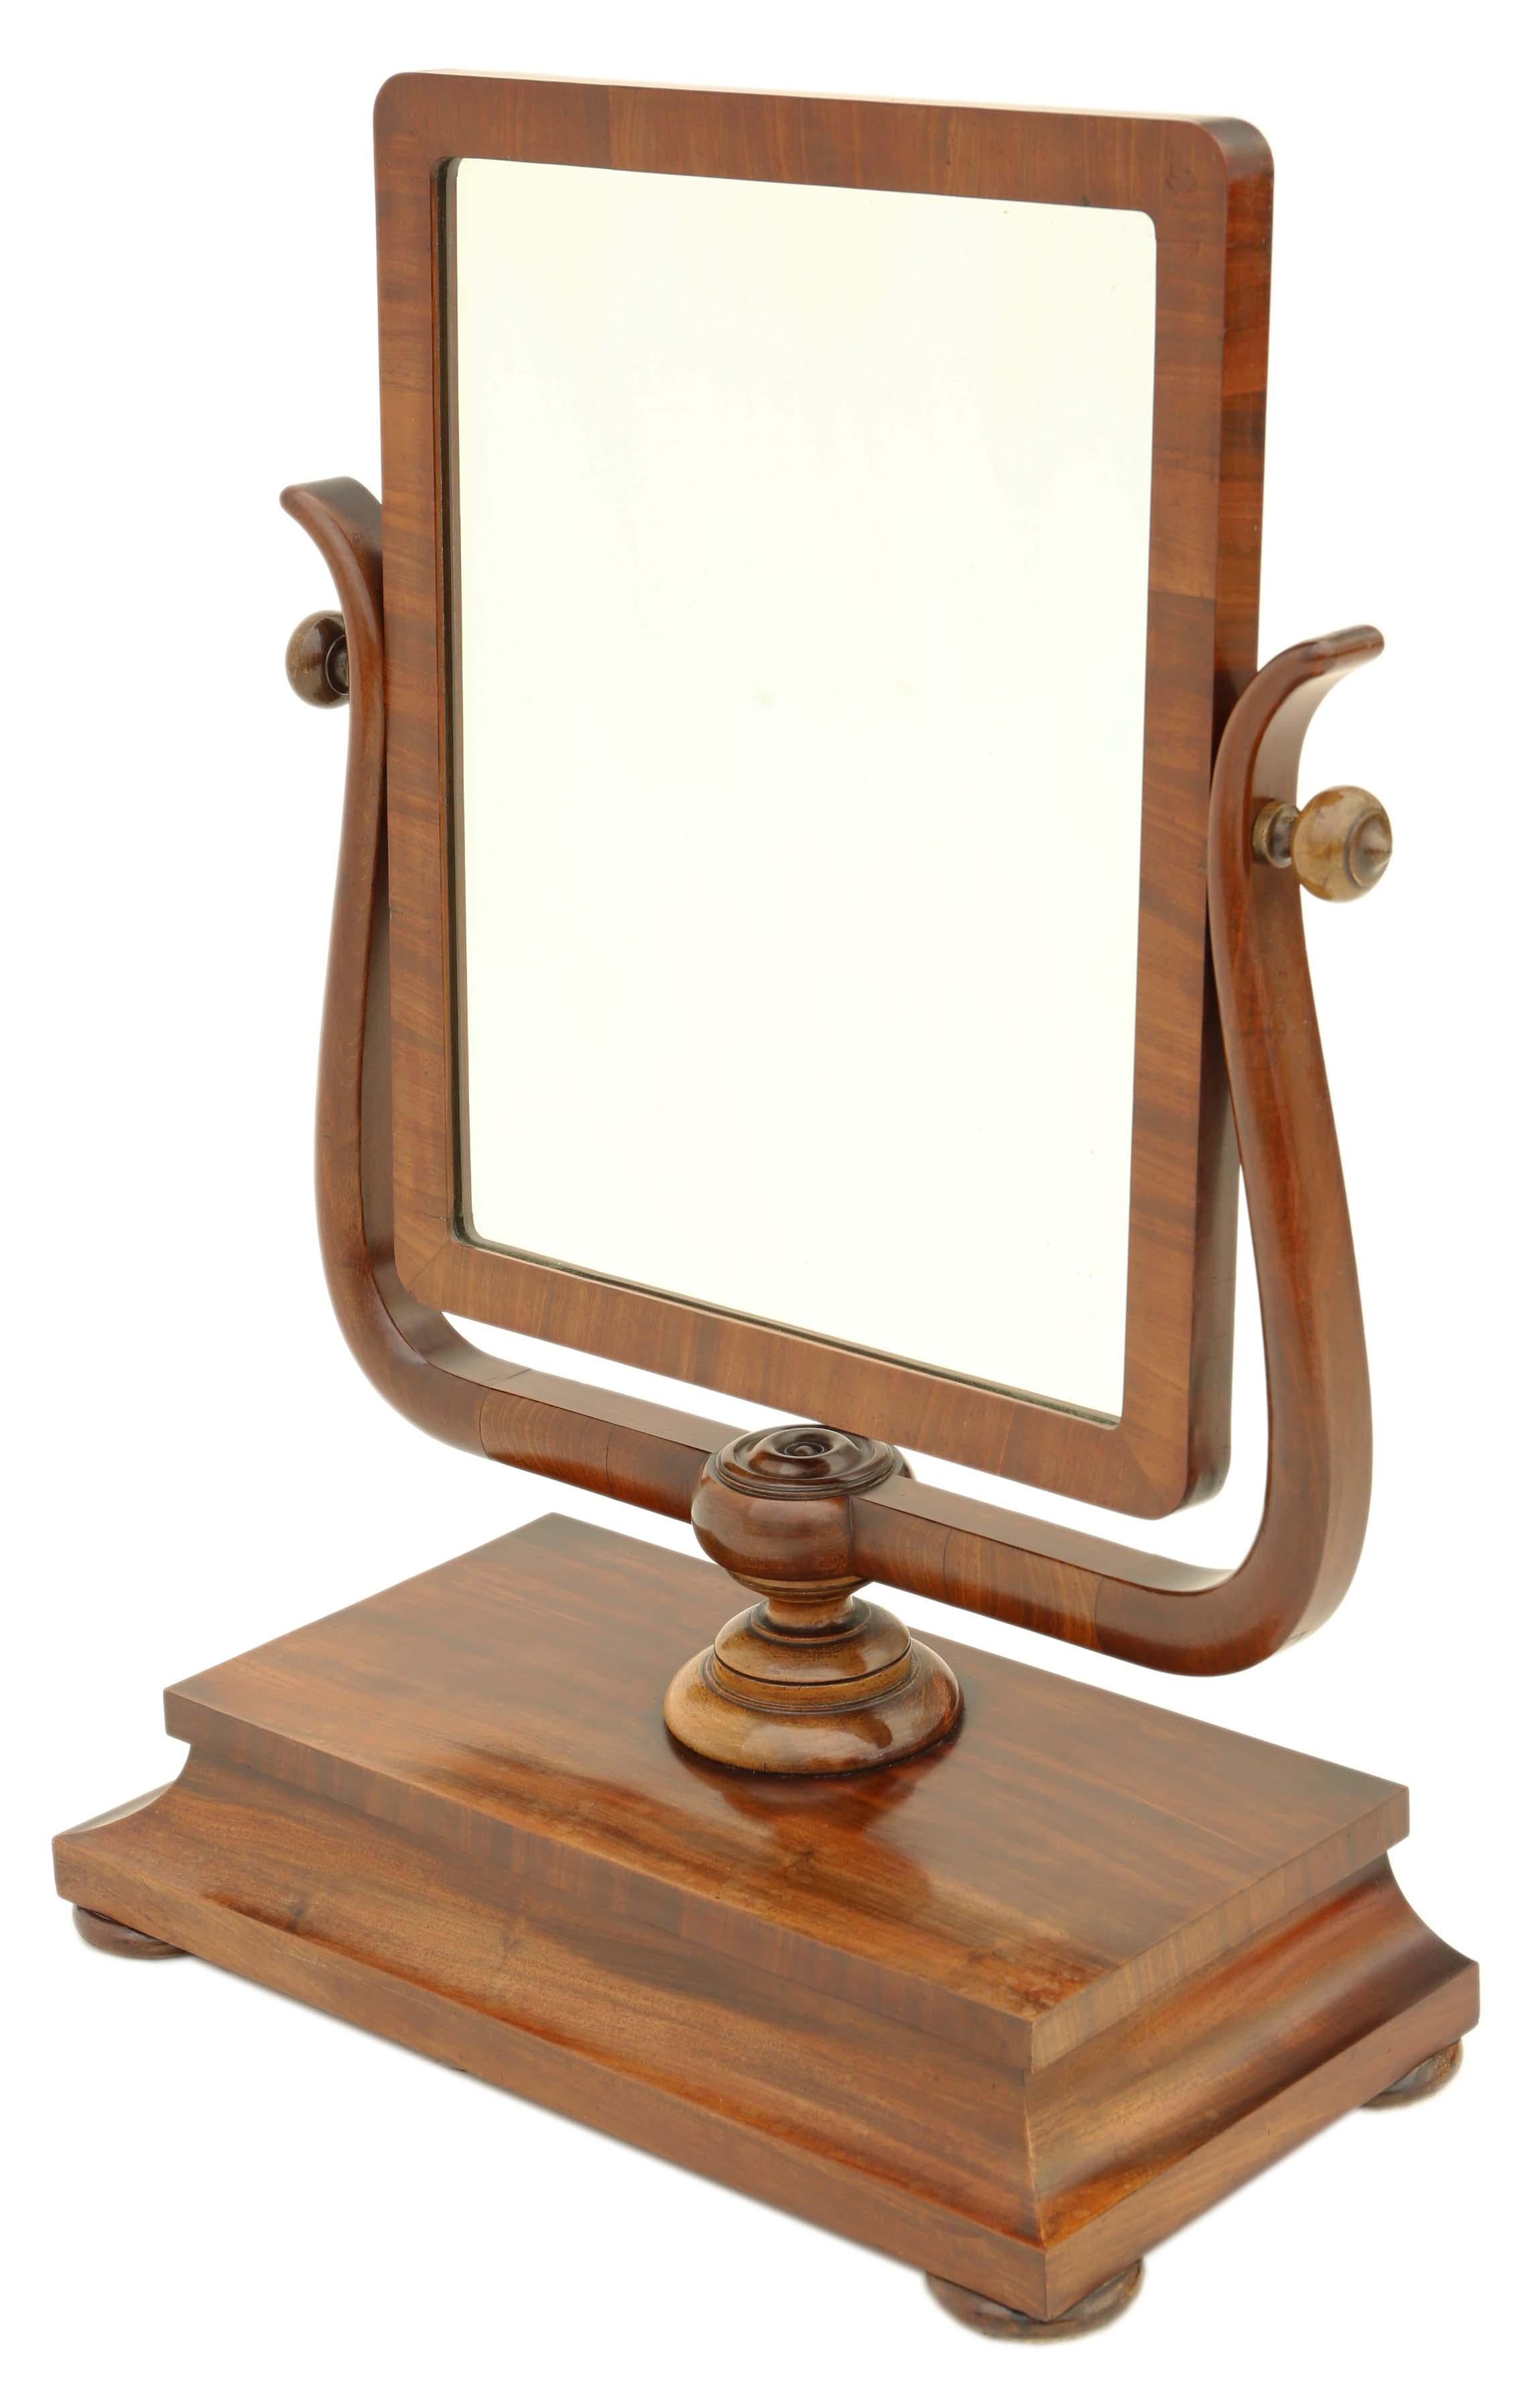 Antique circa 1825 Regency mahogany swing dressing table or toilet mirror.

This is a lovely elegant mirror, that is full of age and charm, with great design and proportions. Far better than most.

A rare find, that would look amazing in the